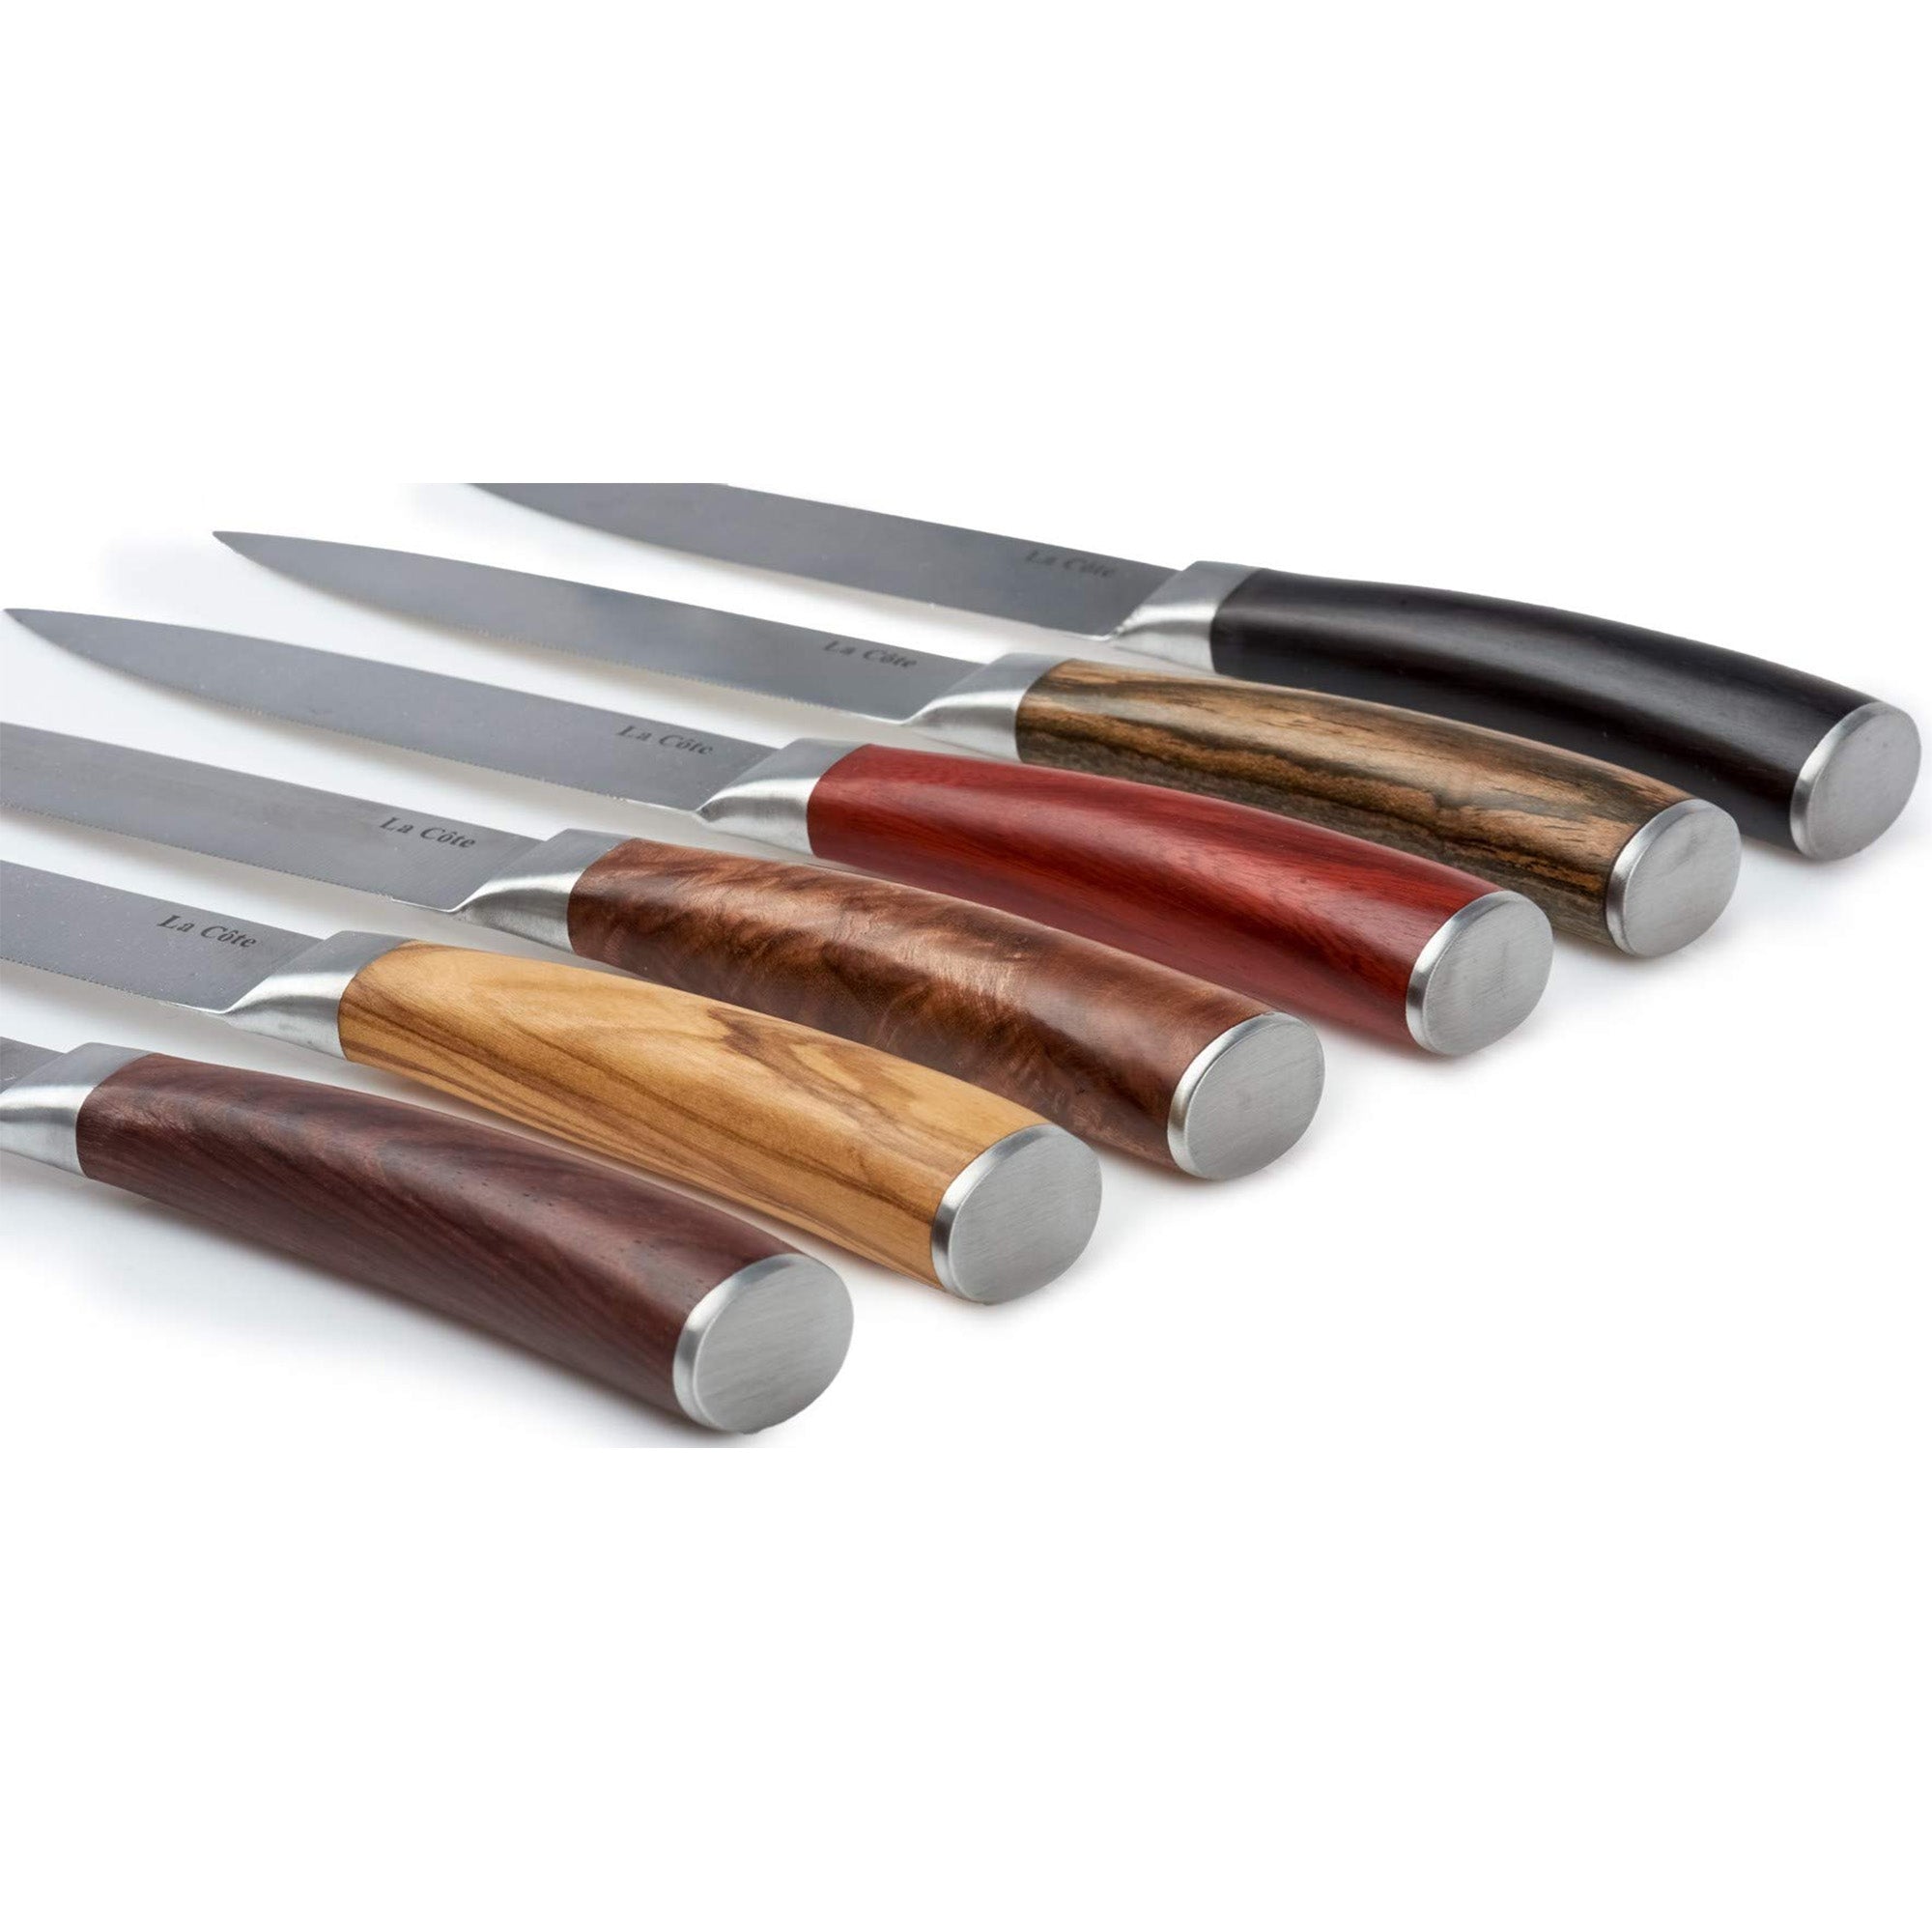 La Cote 6 Piece Exotic Woods Steak Knives Set Japanese Stainless Steel in Gift Box